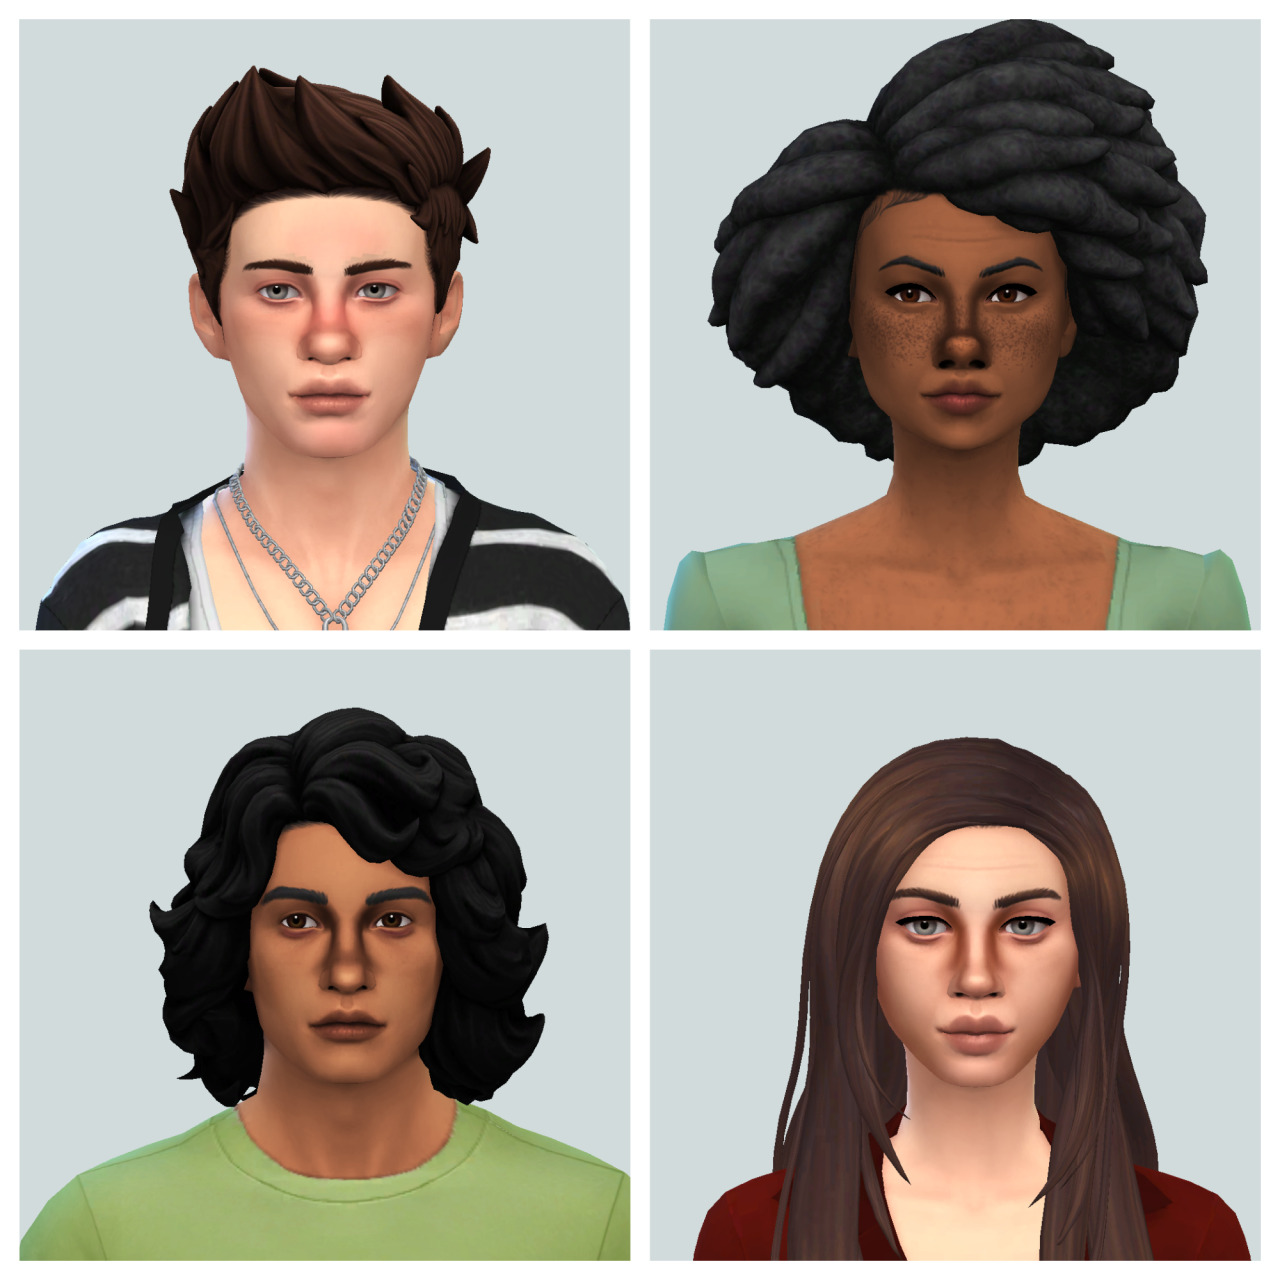 !!Kris!! : A new masterpost of all the sims in my gameplay...